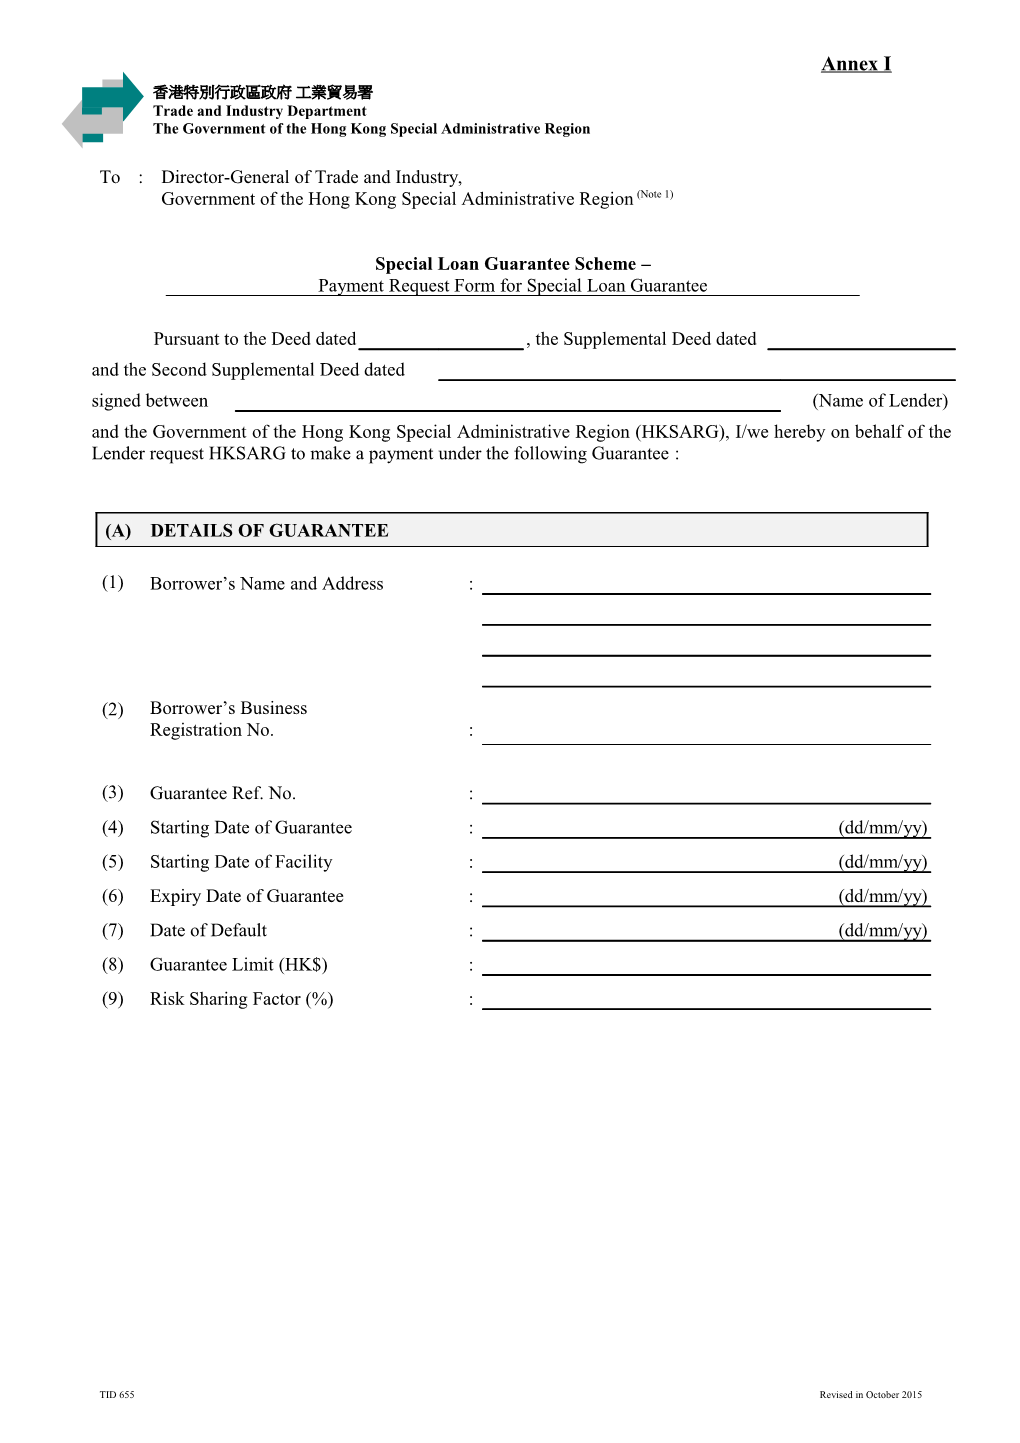 Payment Request Form for Special Loan Guarantee